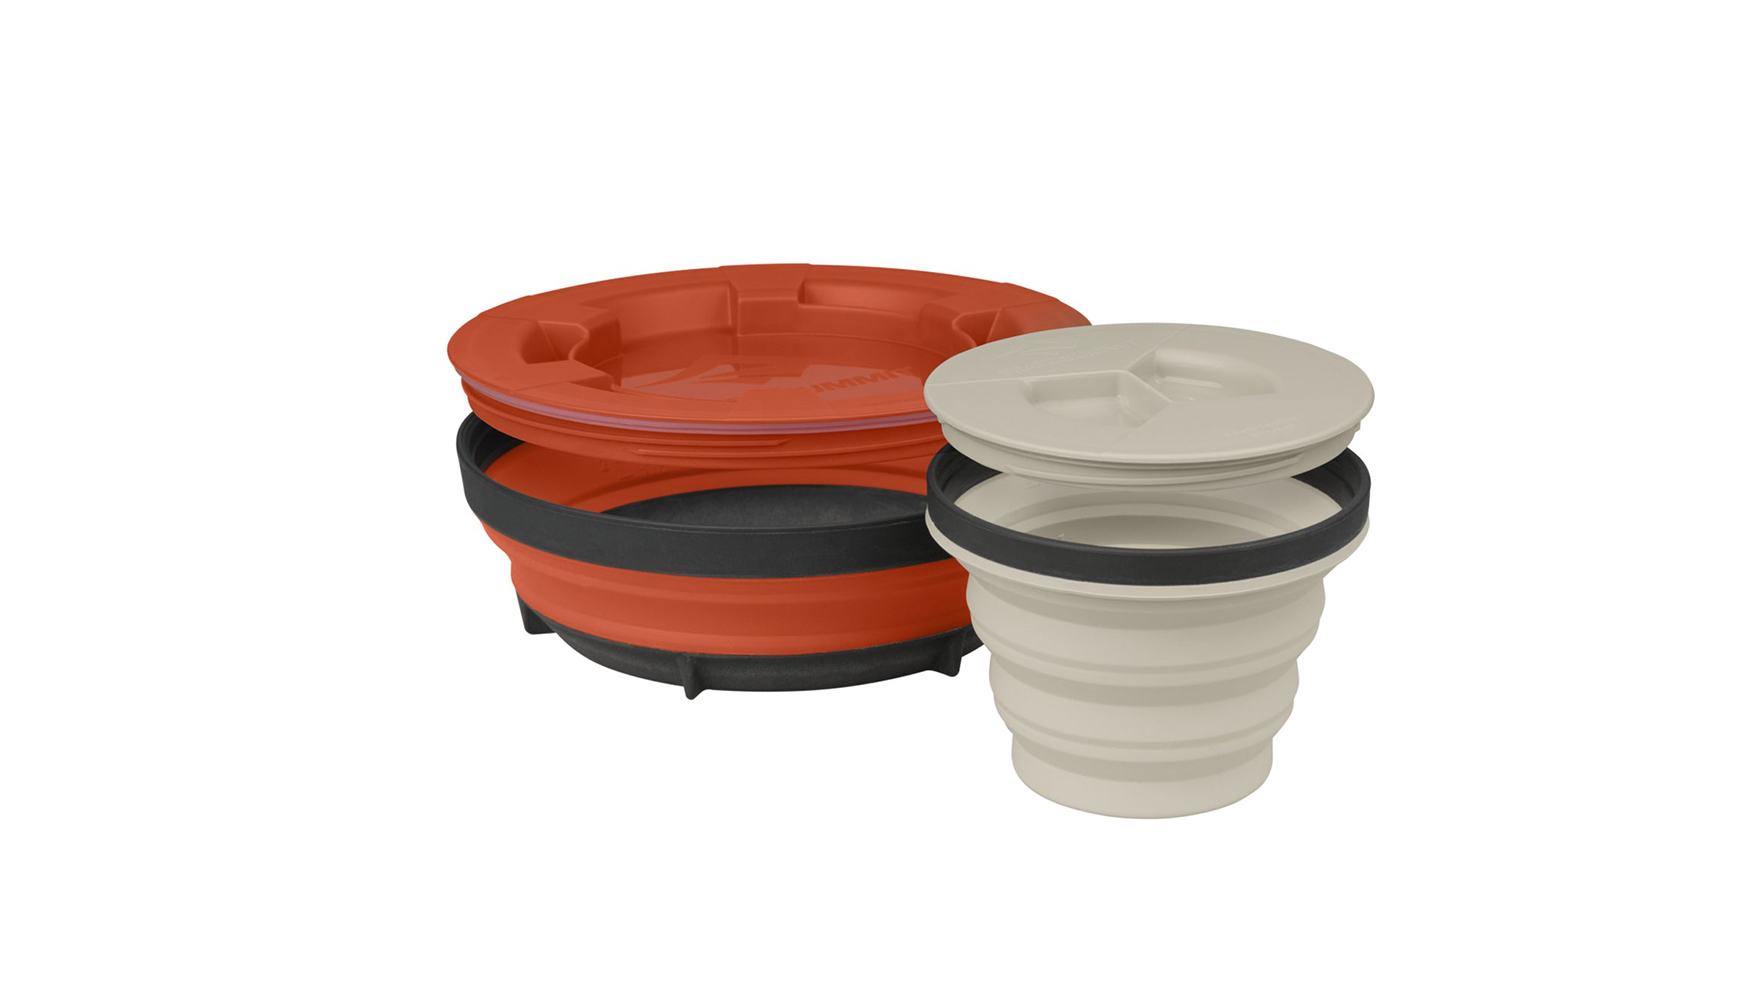 X Seal & Go Collapsible Container Set | Sea to Summit